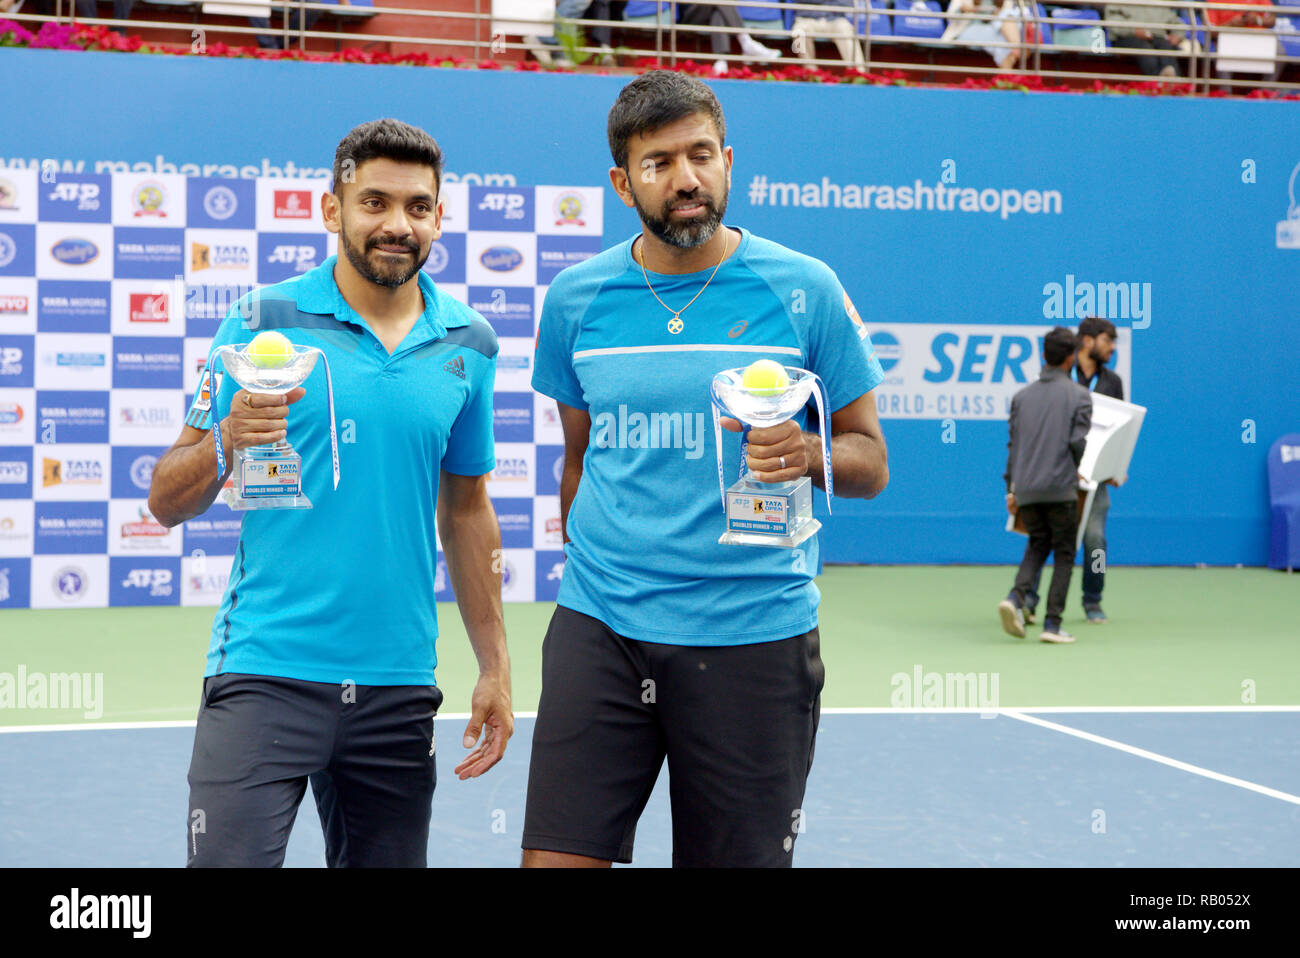 Pune, India. 5th January 2019. Divij Sharan and Rohan Bopanna, both of  India, pose with their doubles championship trophies won at Tata Open  Maharashtra ATP Tennis tournament in Pune, India. Credit: Karunesh